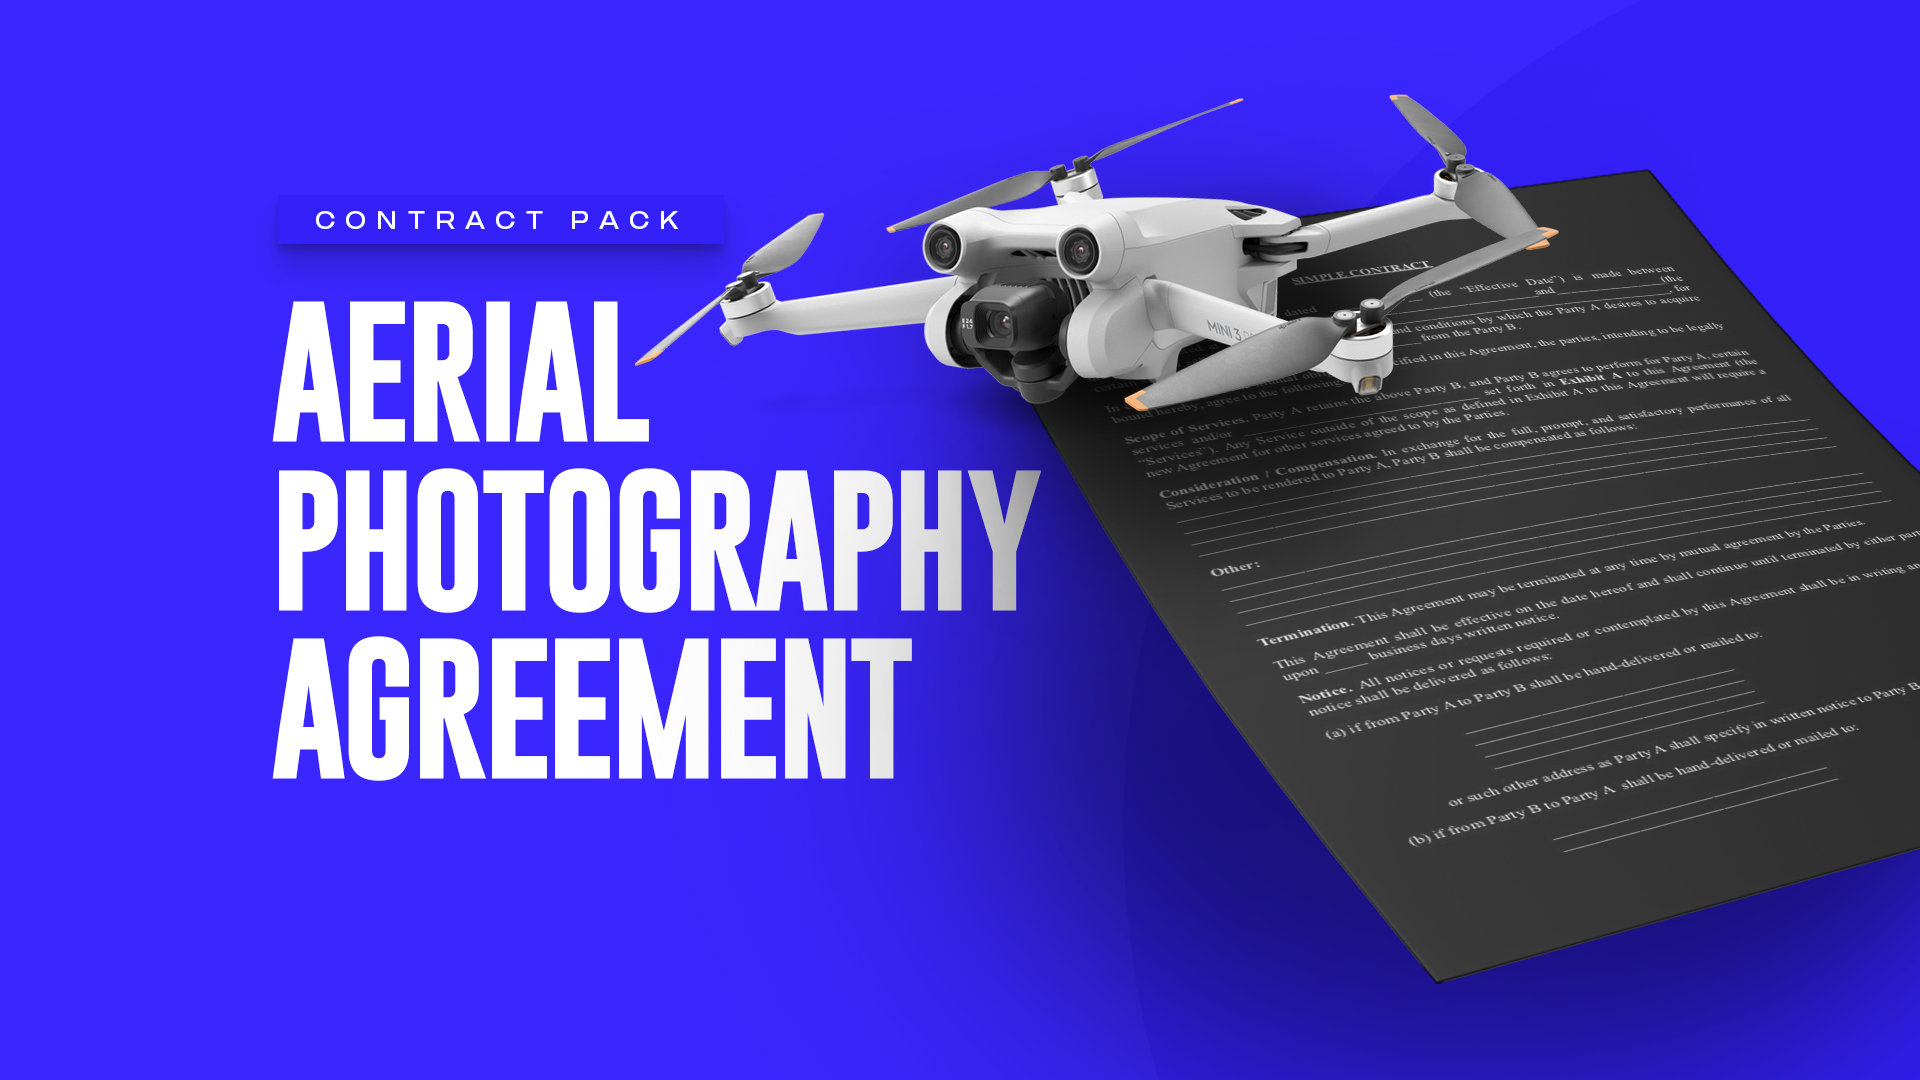 https://flashfilmacademy.tv/programs/aerial-photography-agreement-contract